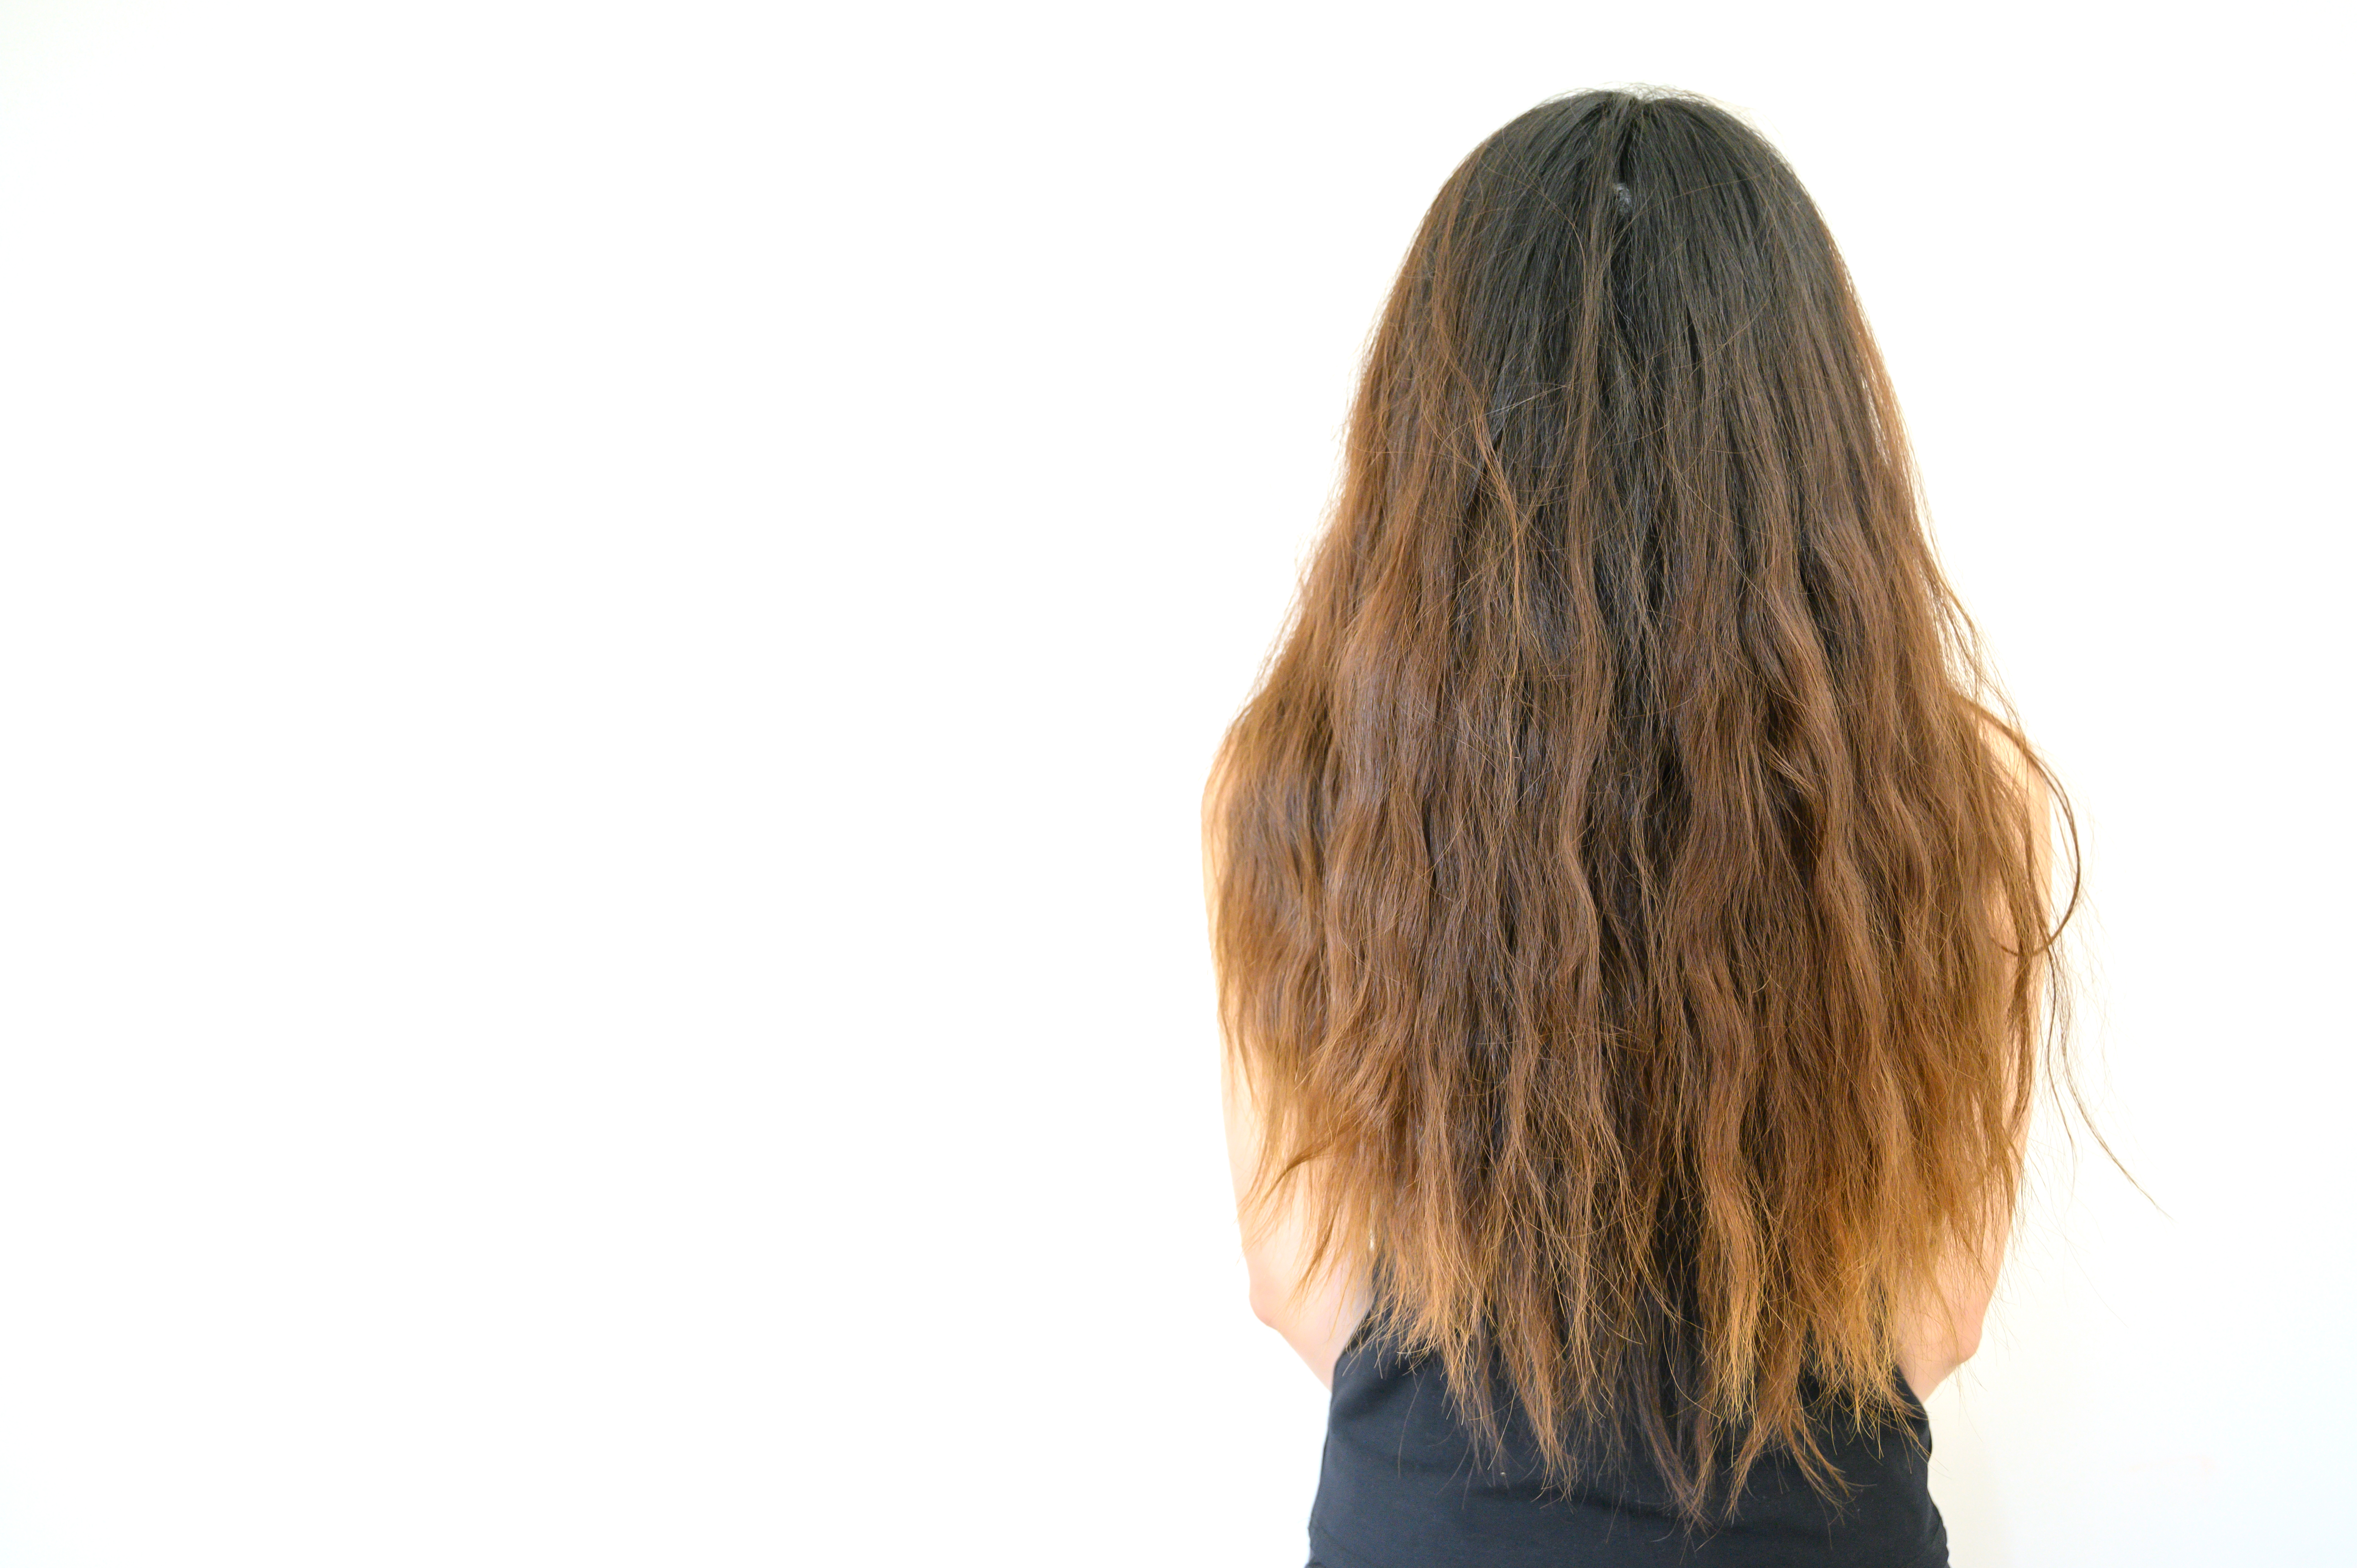 Rear view of a young woman with frizzy hair | Source: Shutterstock